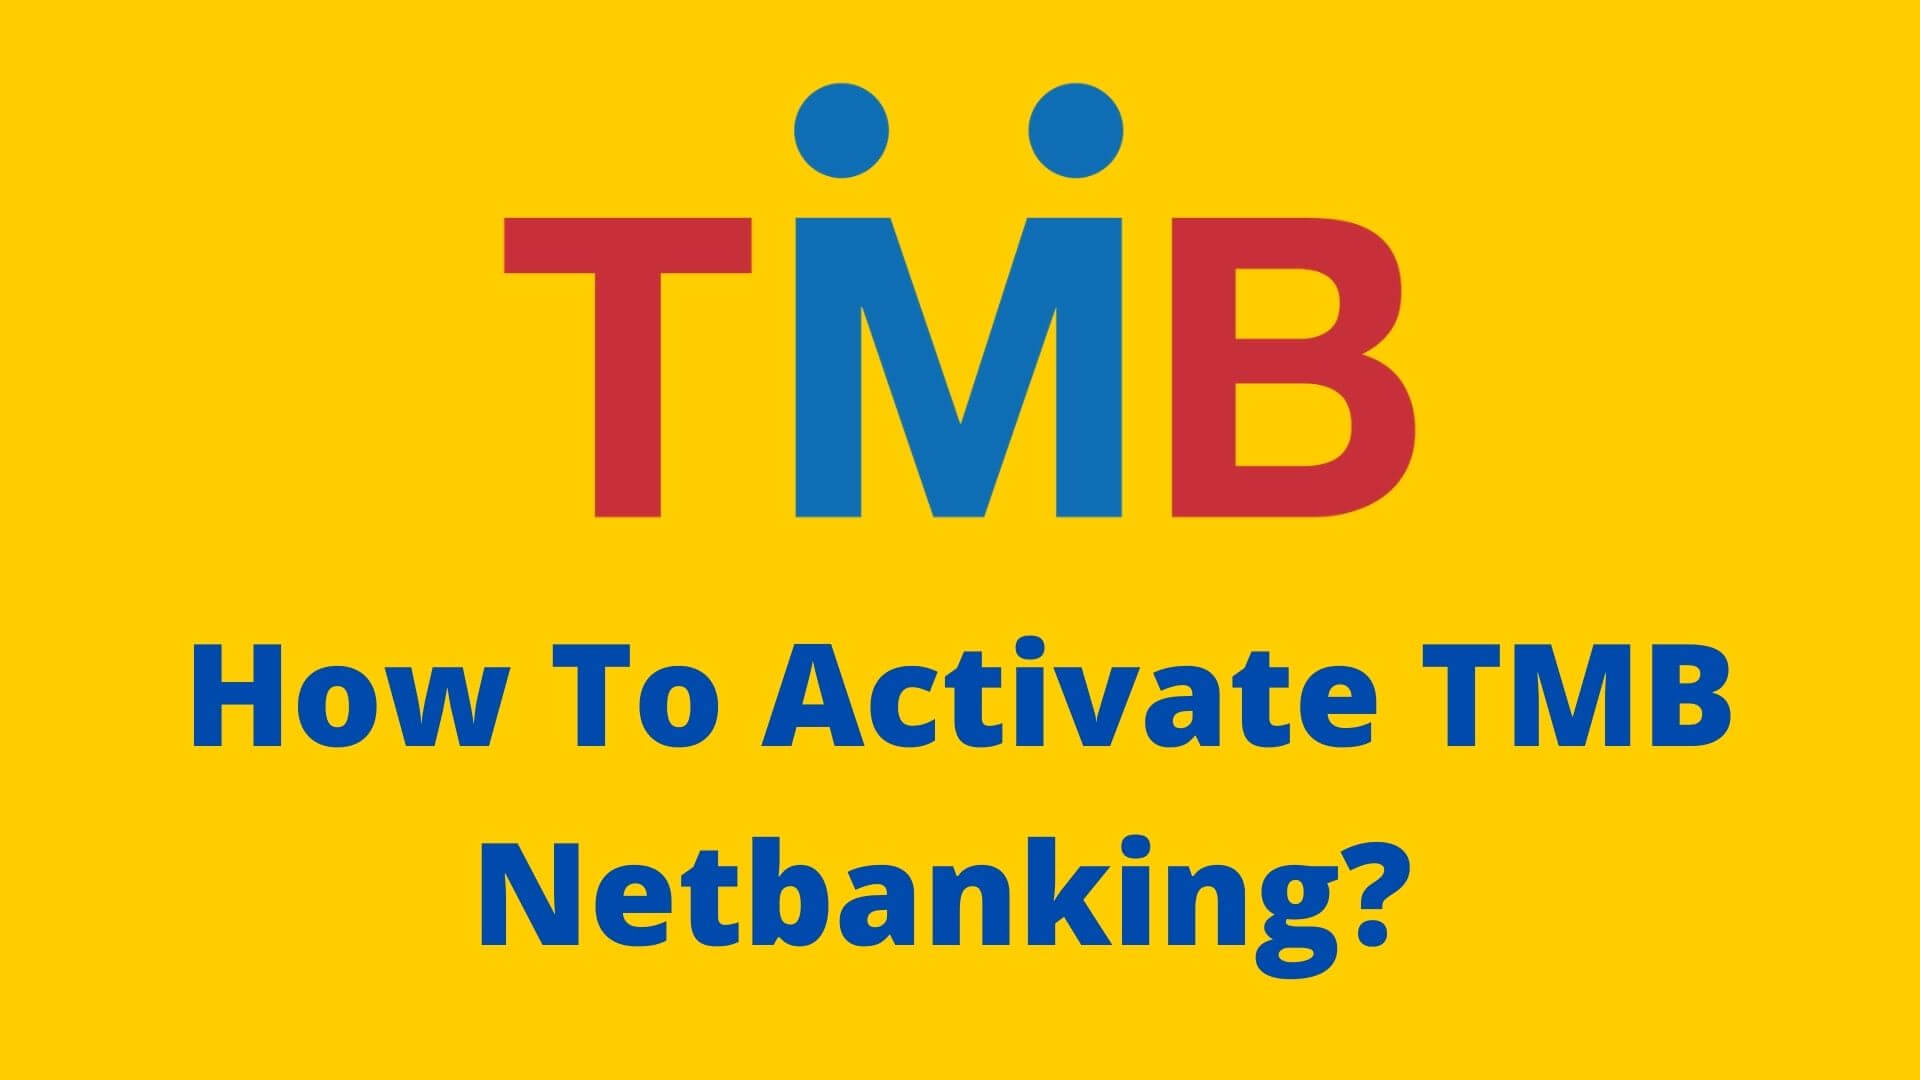 How To Register or Activate TMB Netbanking? (Step By Step Guide)